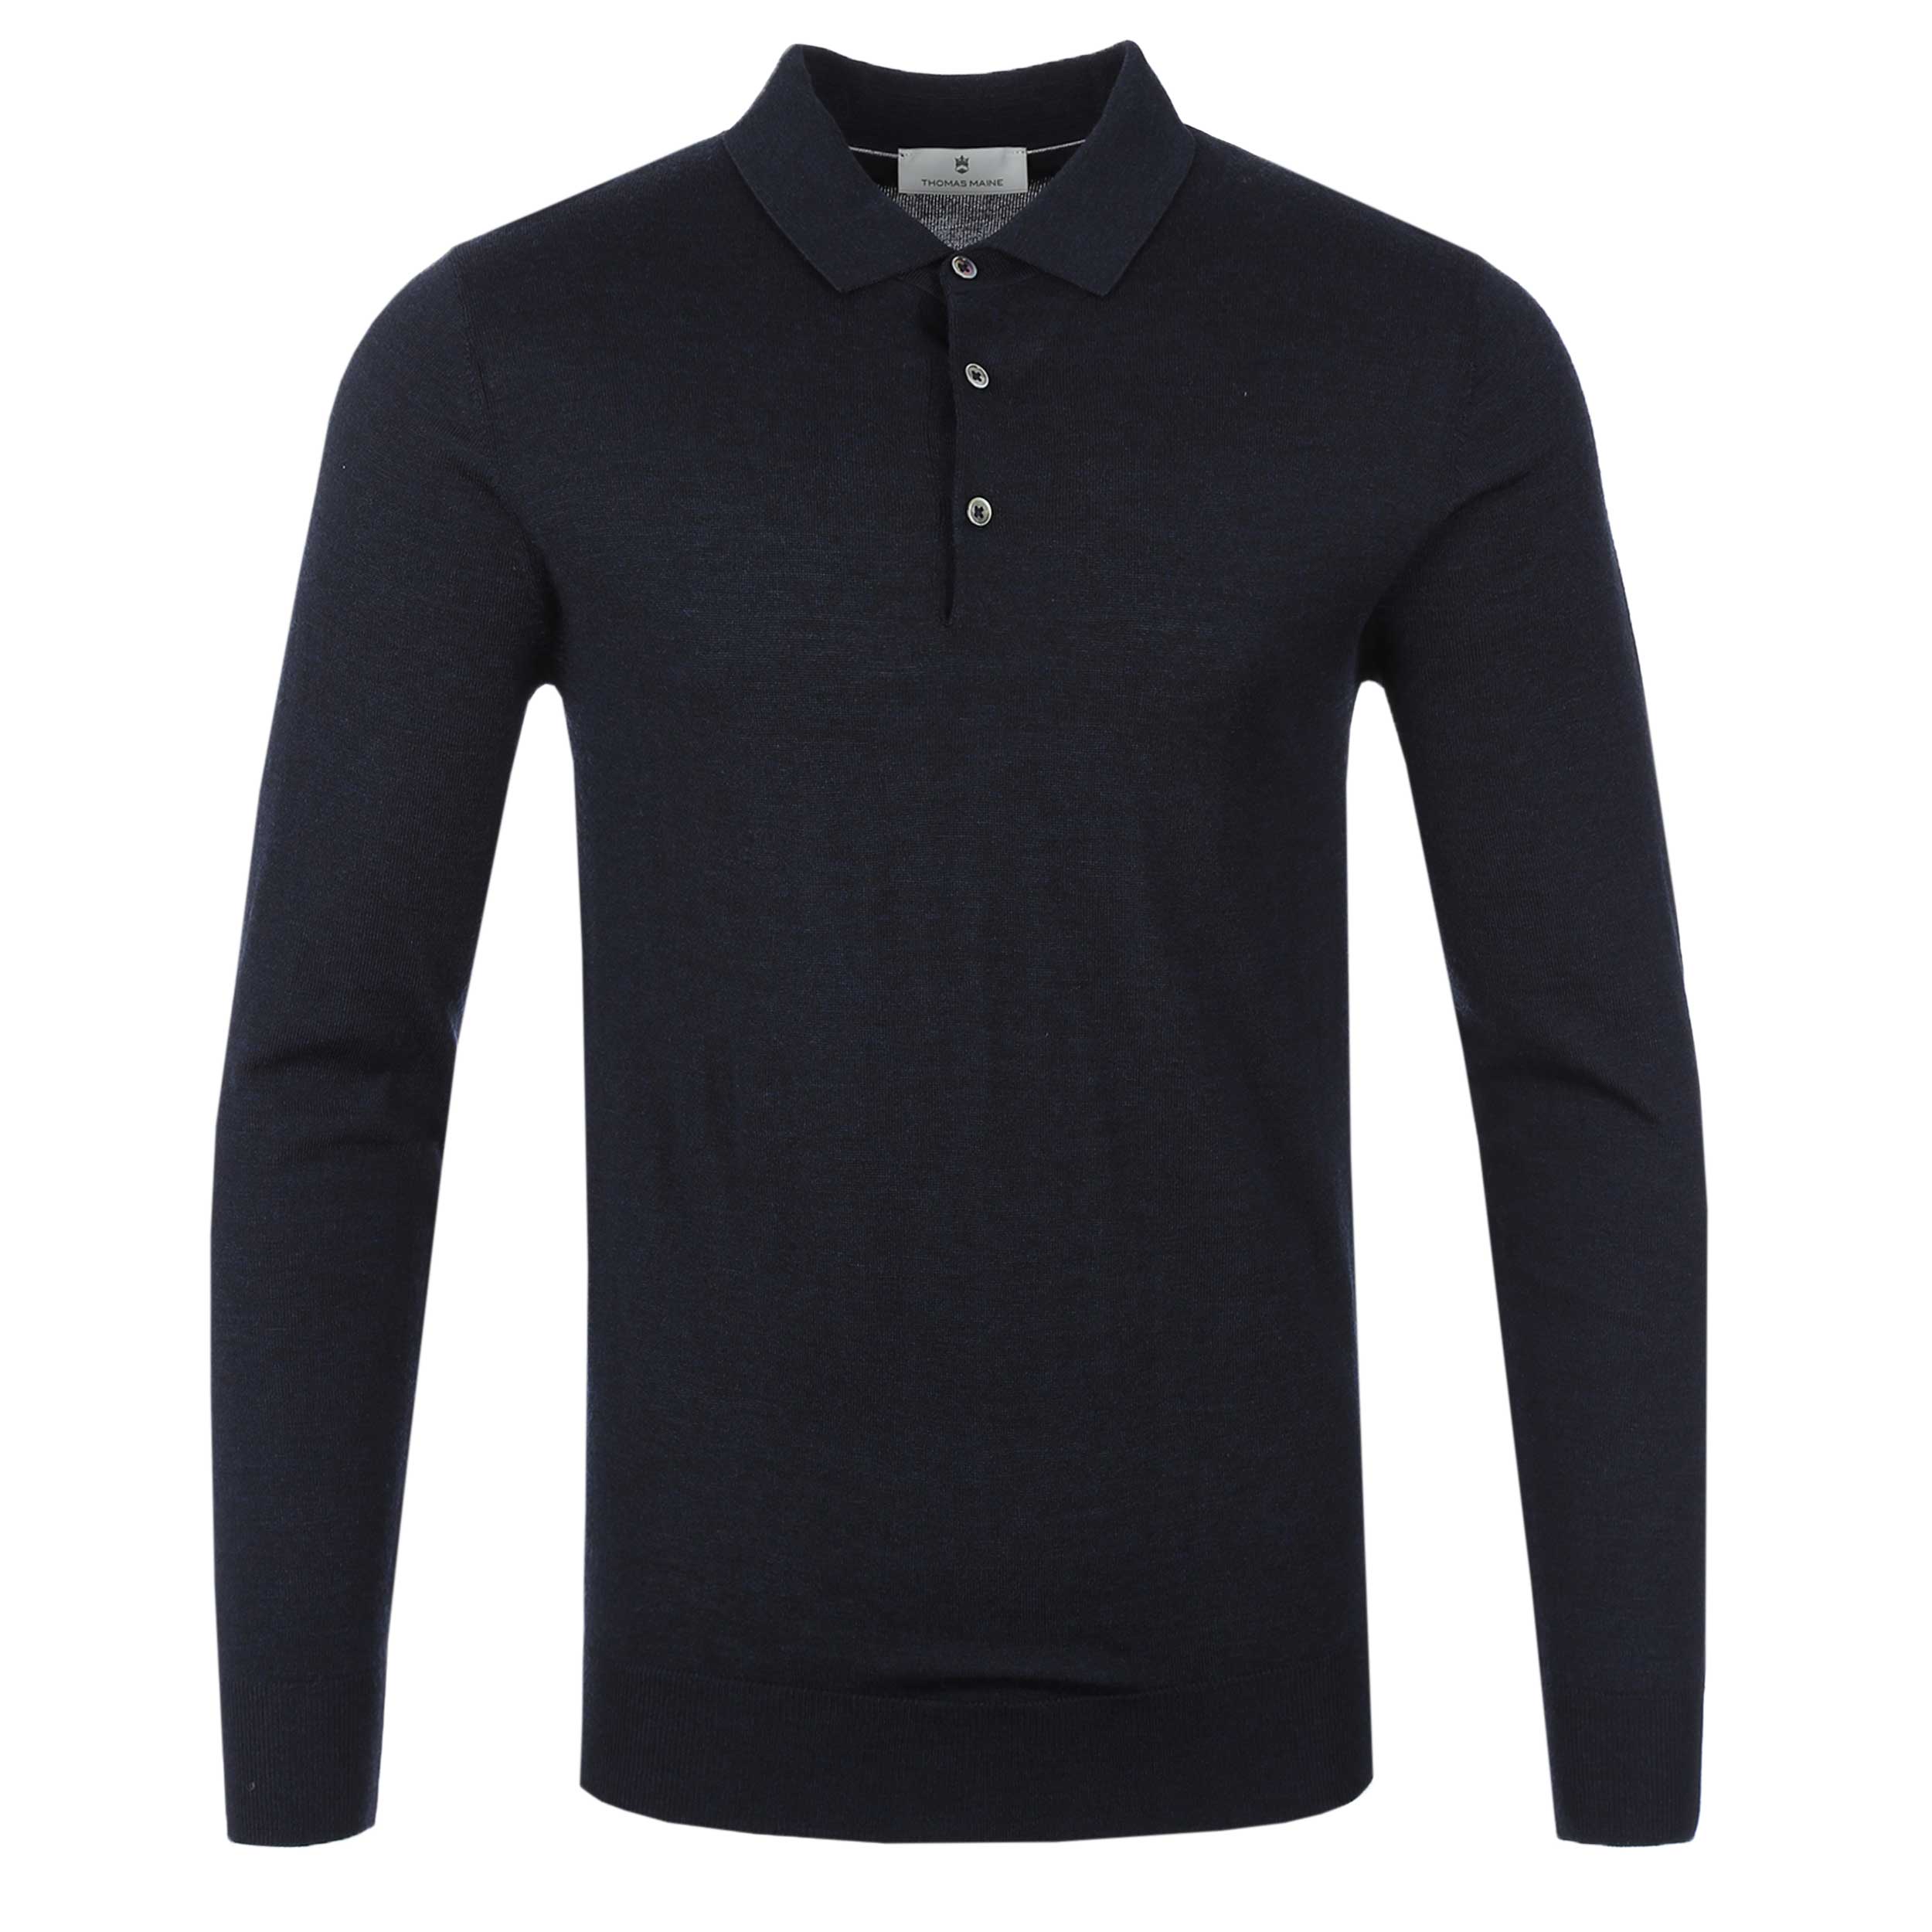 Thomas Maine 3 Button Knit Polo Shirt in Navy